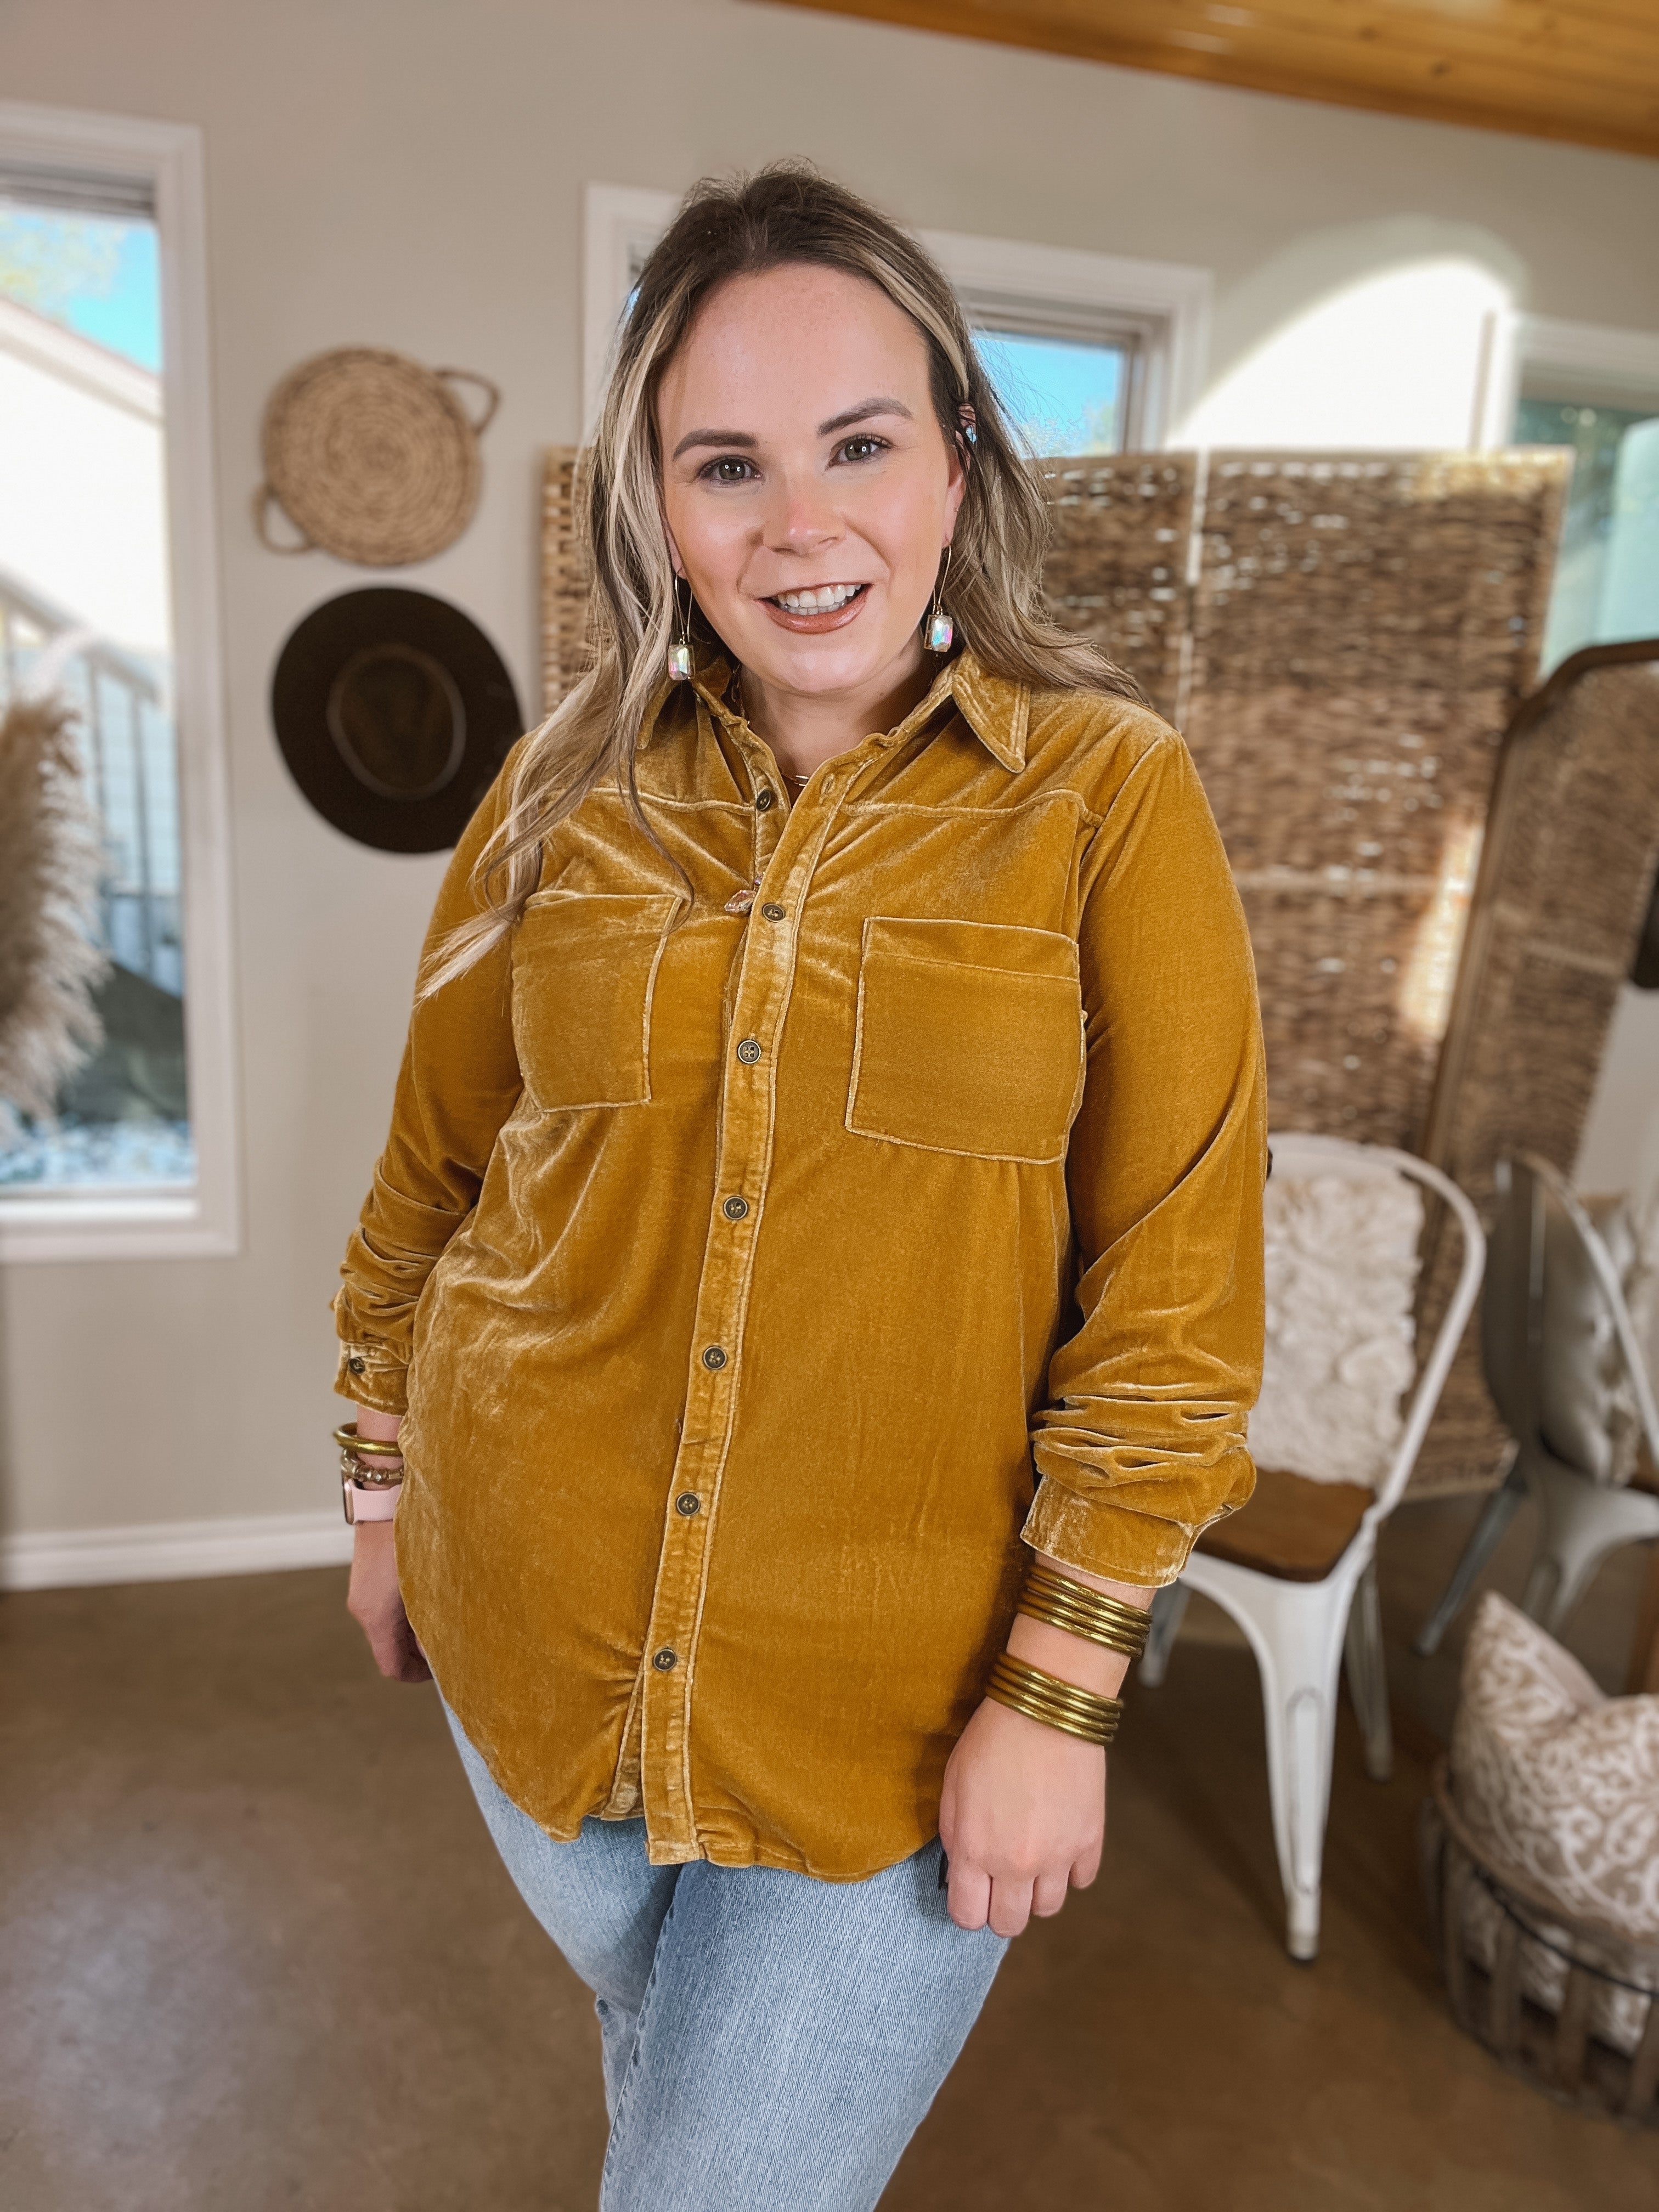 Candy Apple Evening Button Up Velvet Long Sleeve Blouse in Mustard - Giddy Up Glamour Boutique